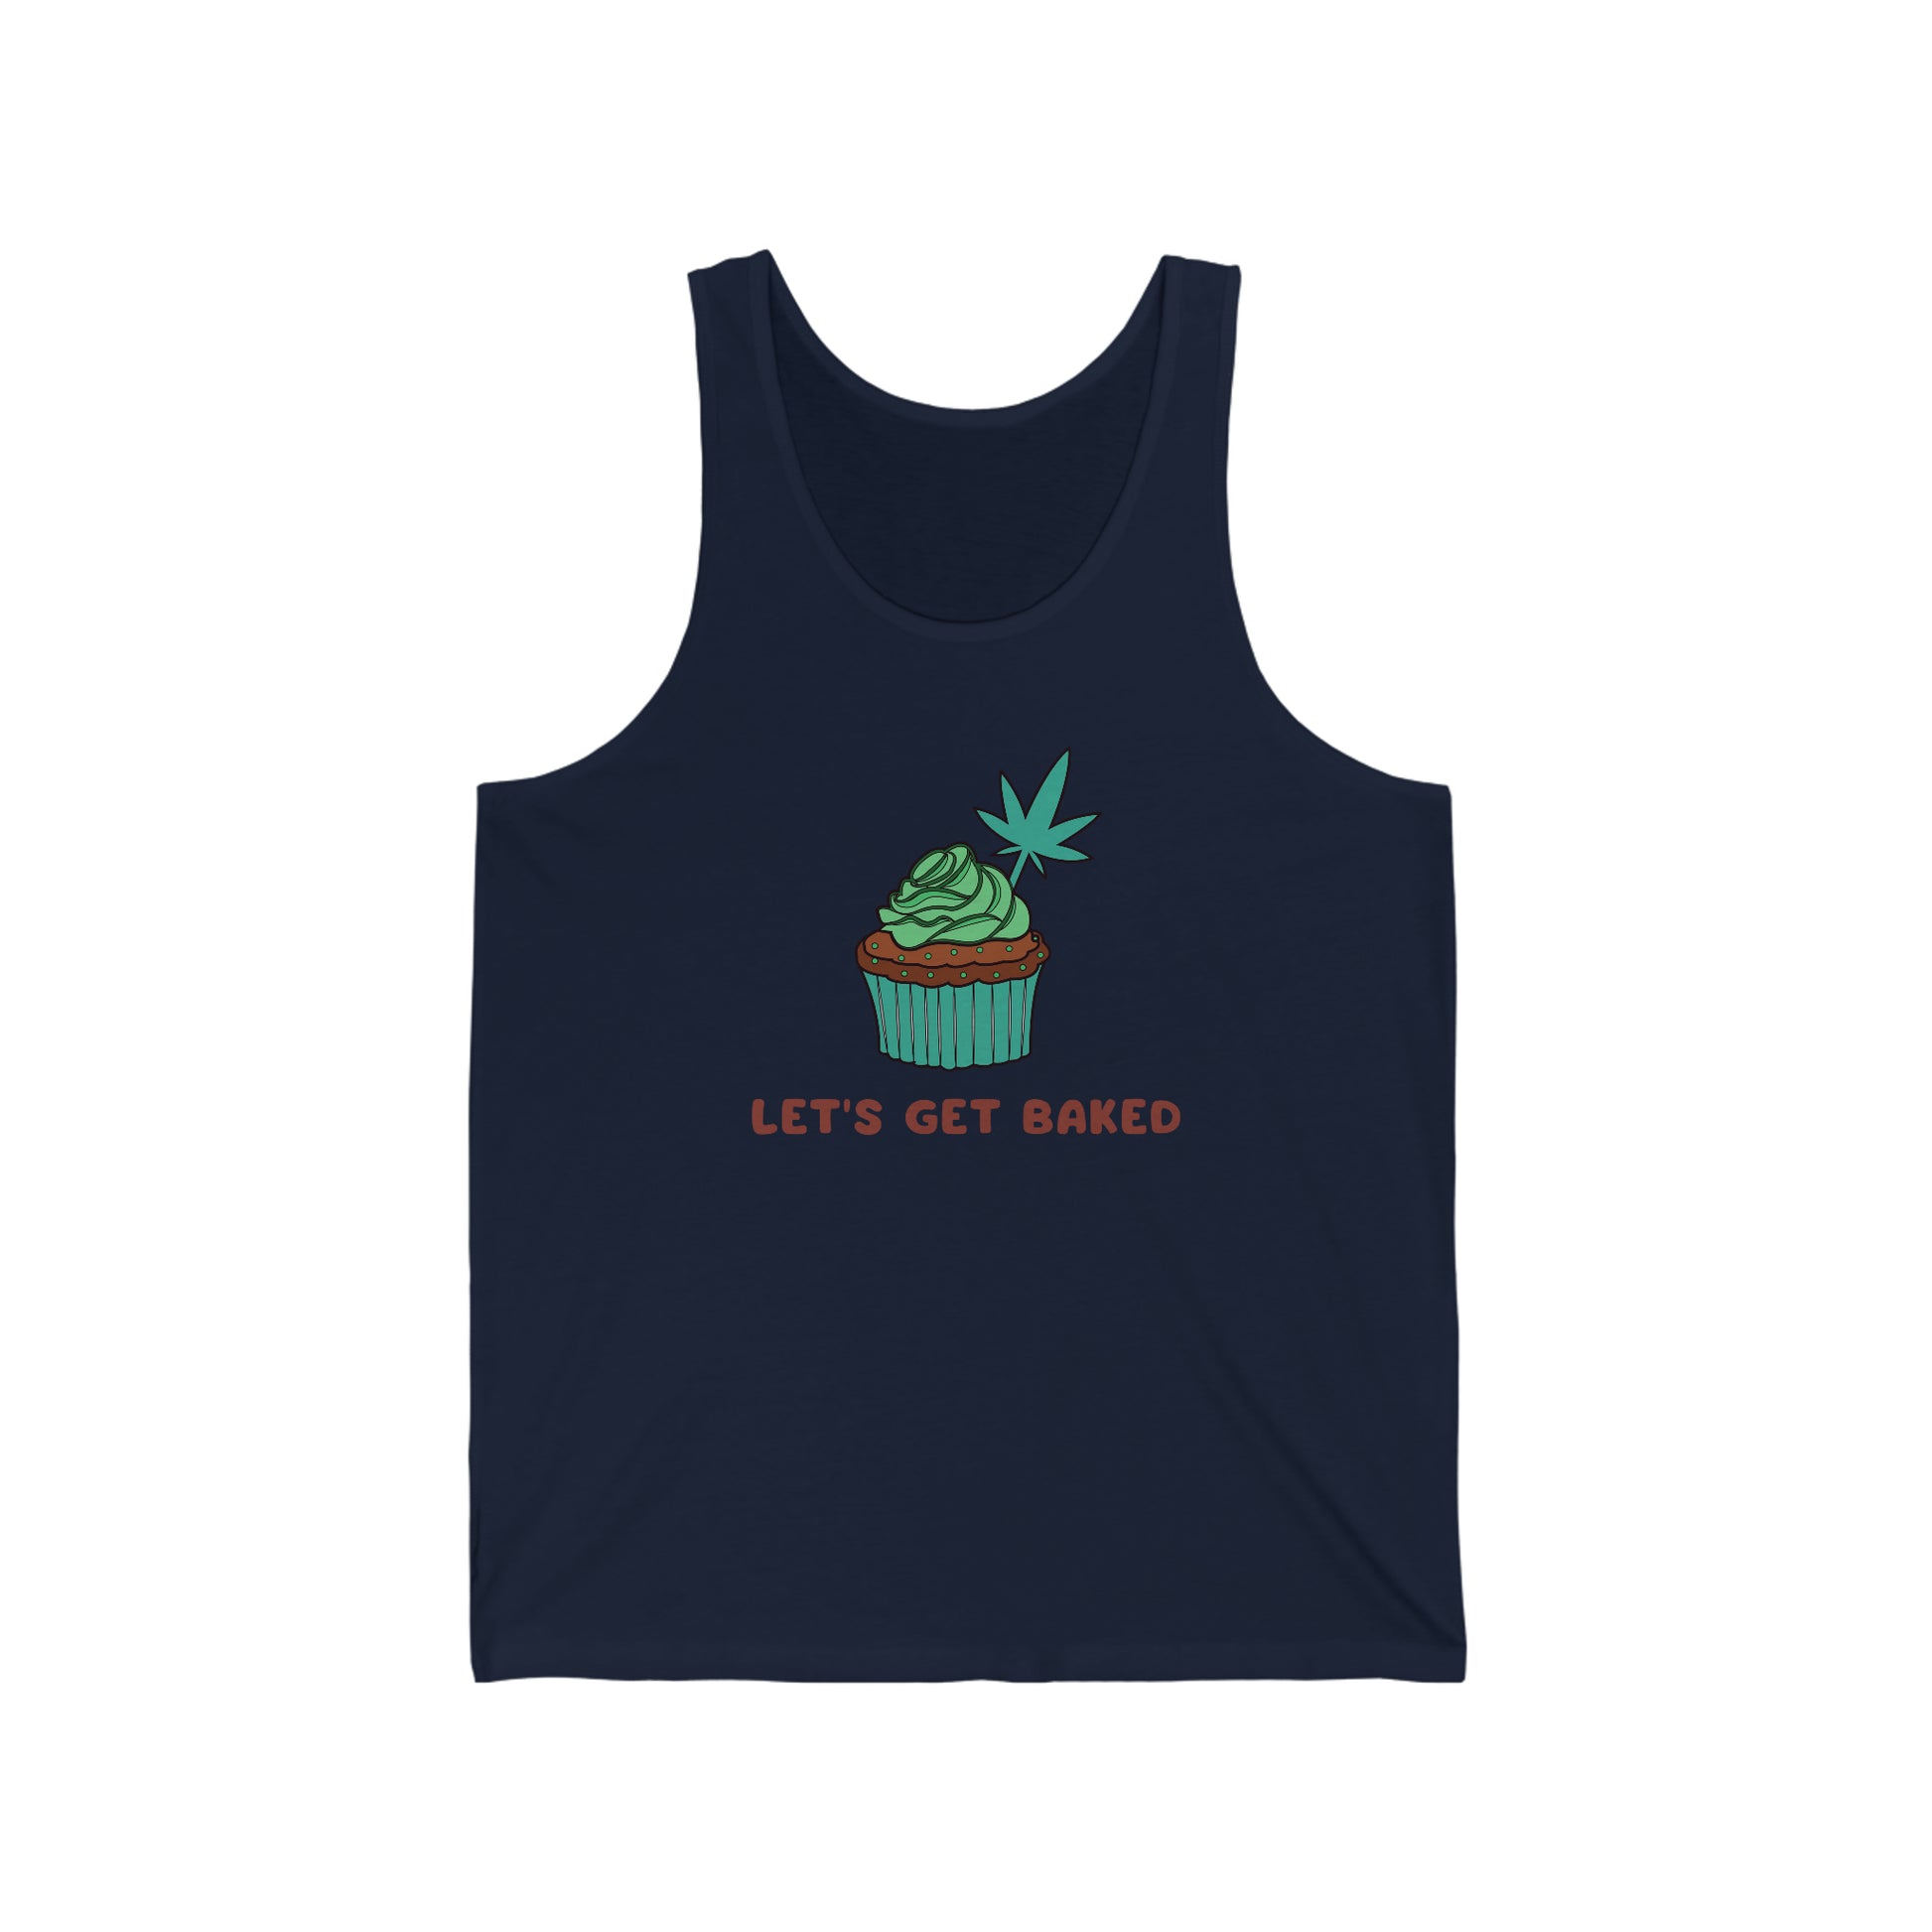 Let's get Let's Get Baked Cannabis Jersey Tank Top.